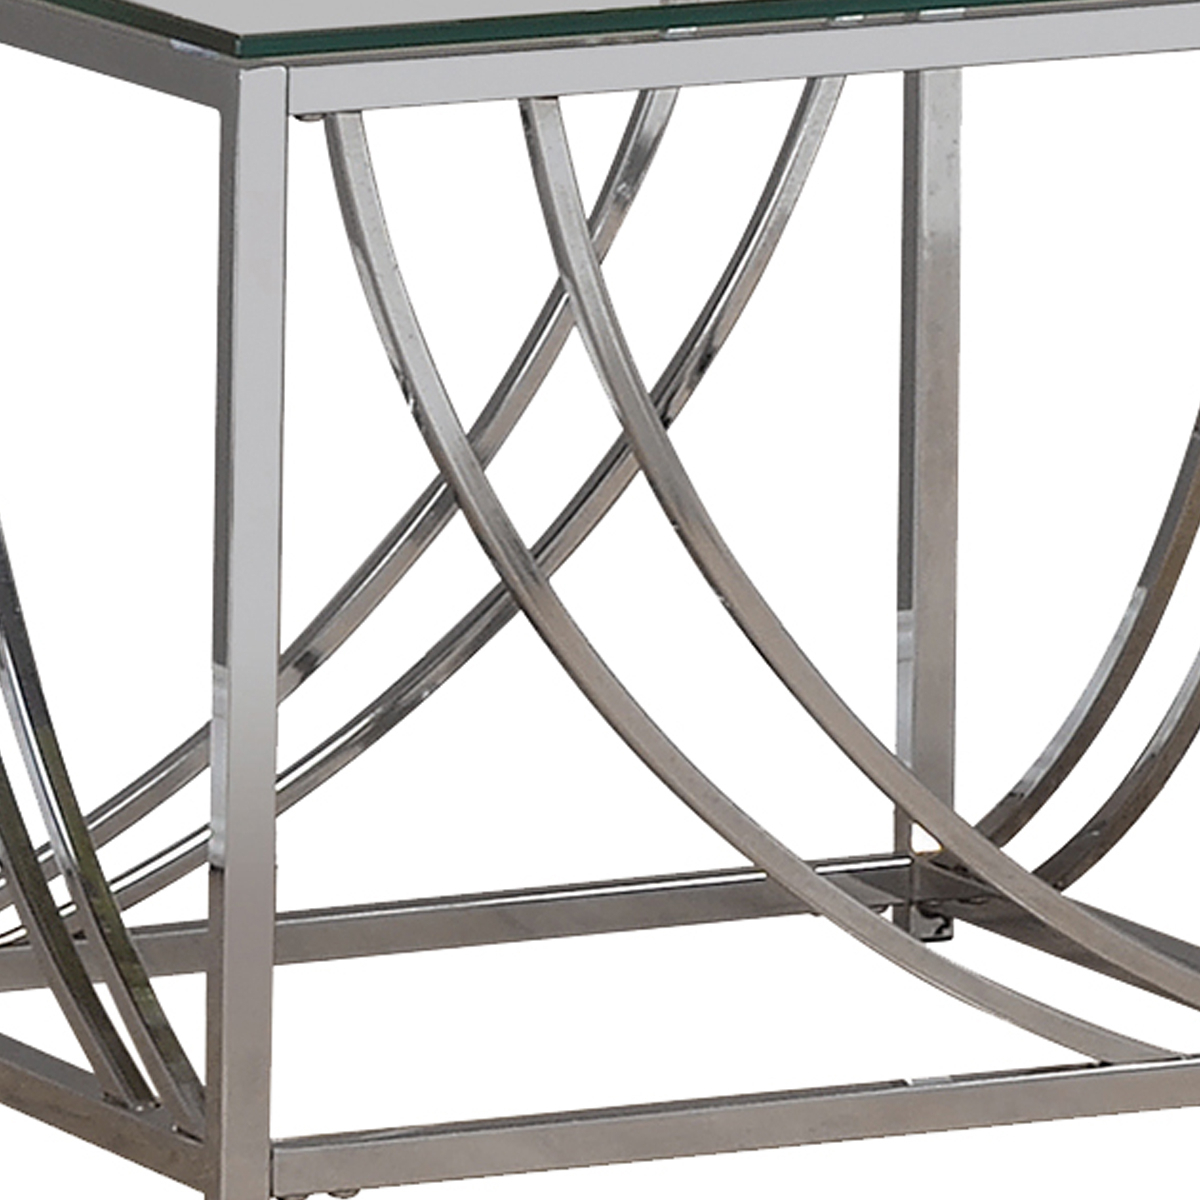 Tempered Glass Top End Table With Metal Tubular Legs, Chrome And Clear- Saltoro Sherpi